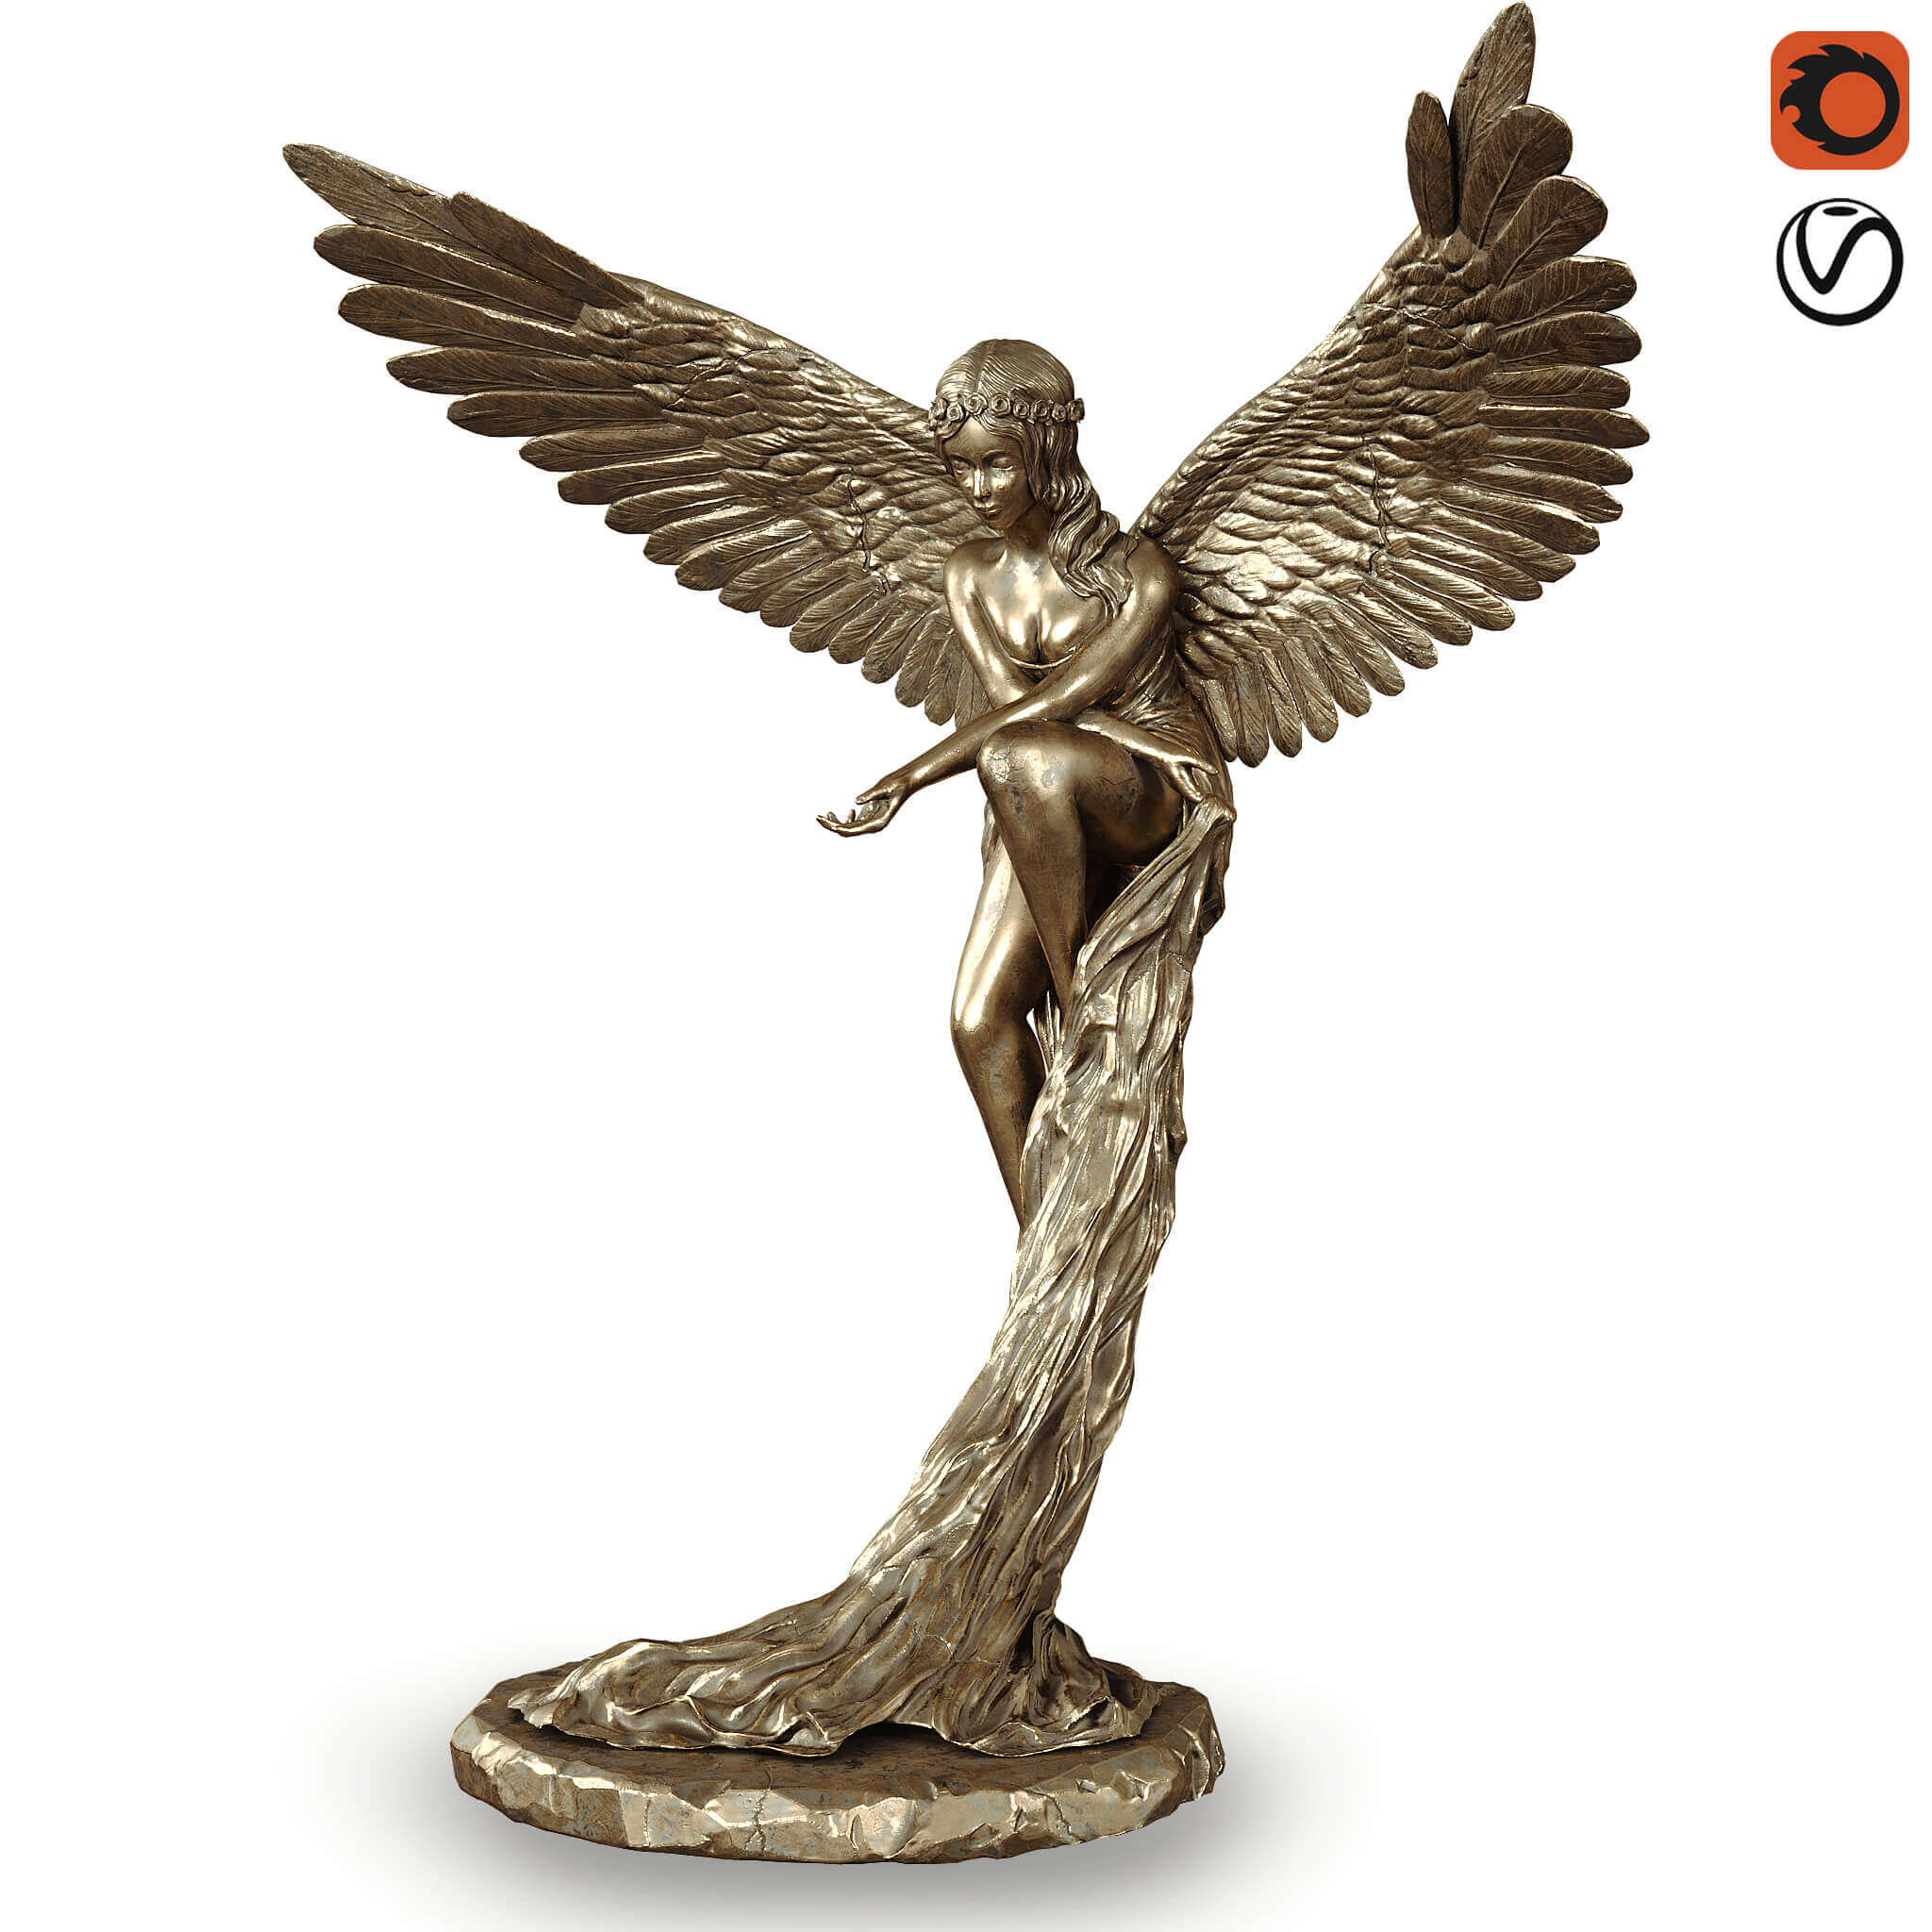 Angel statue Free Download - 3ds Max Store 2020 | Sell Model 3ds Max ...
